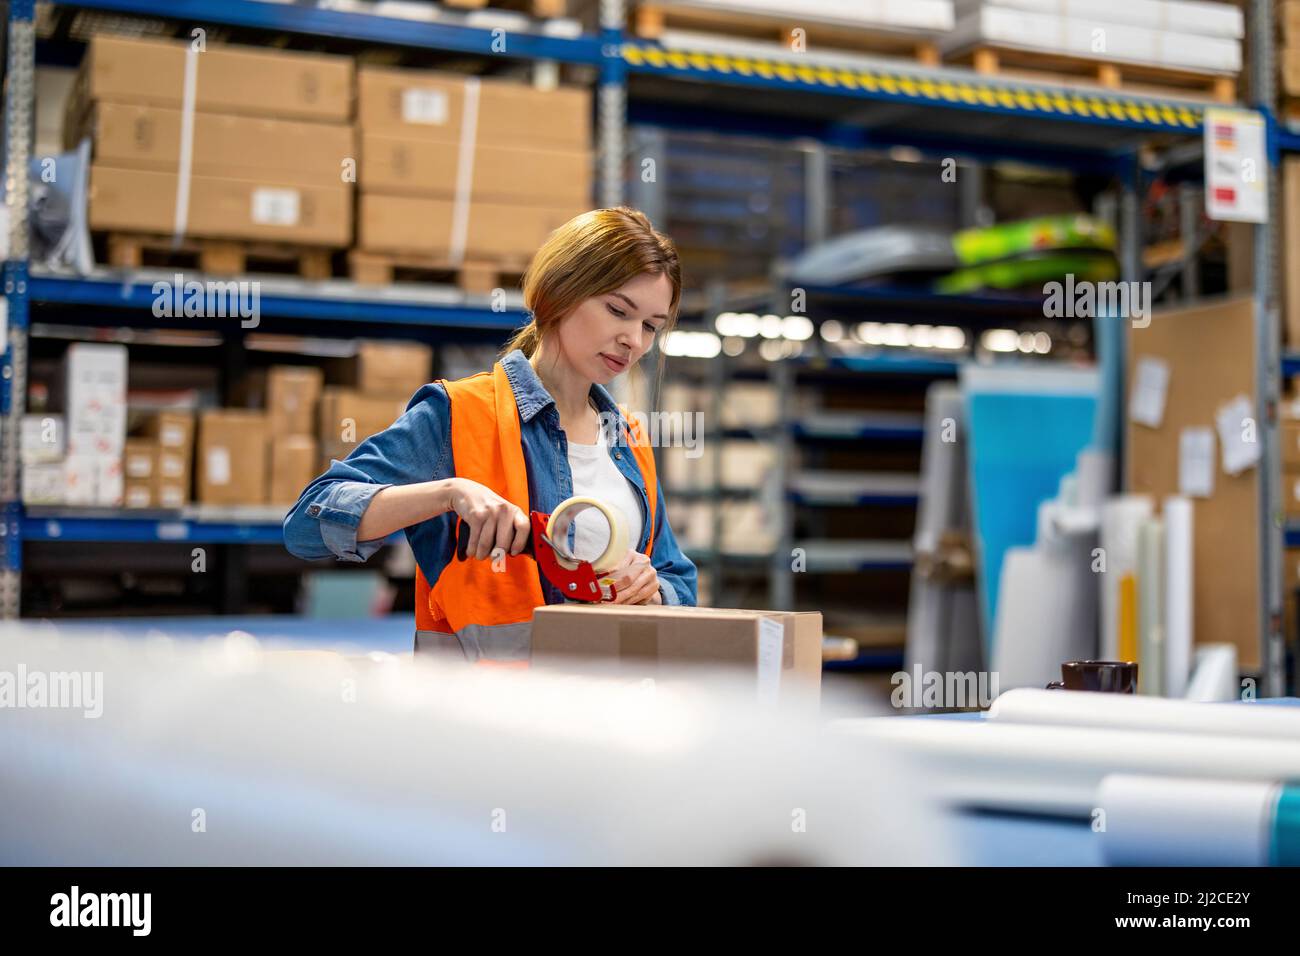 Young woman working in an industrial place of work Stock Photo